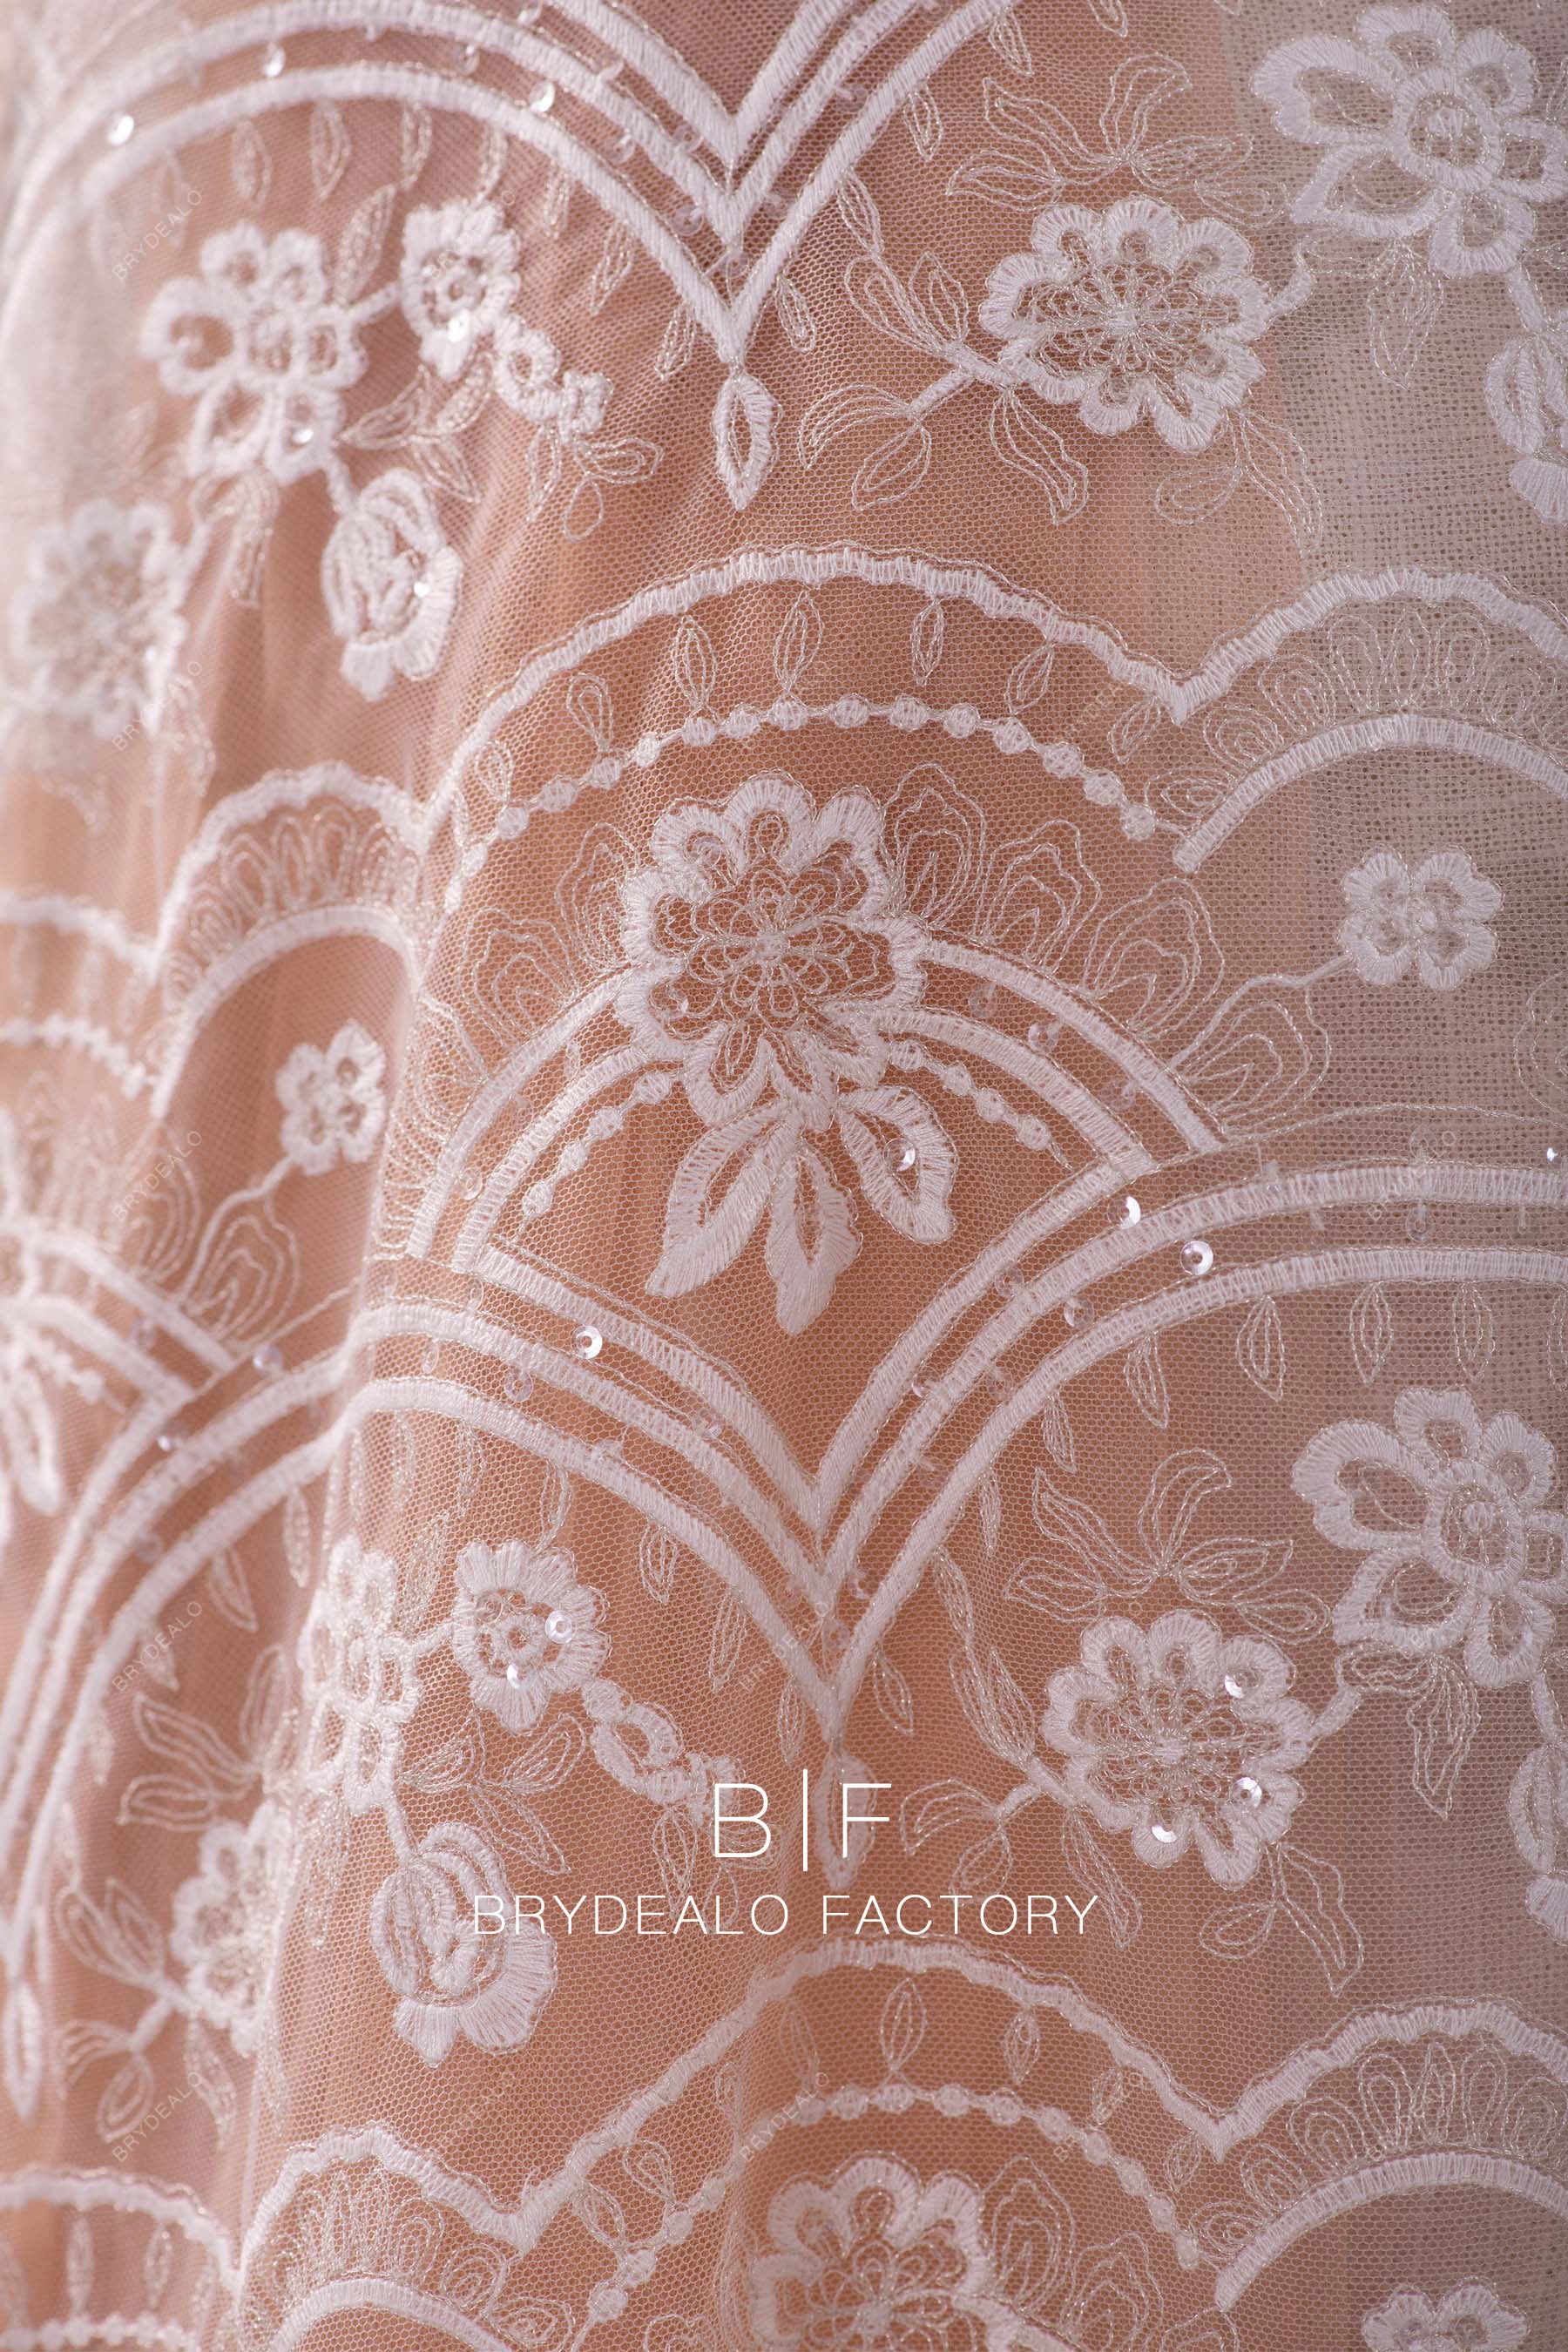 embroidery scalloped lace